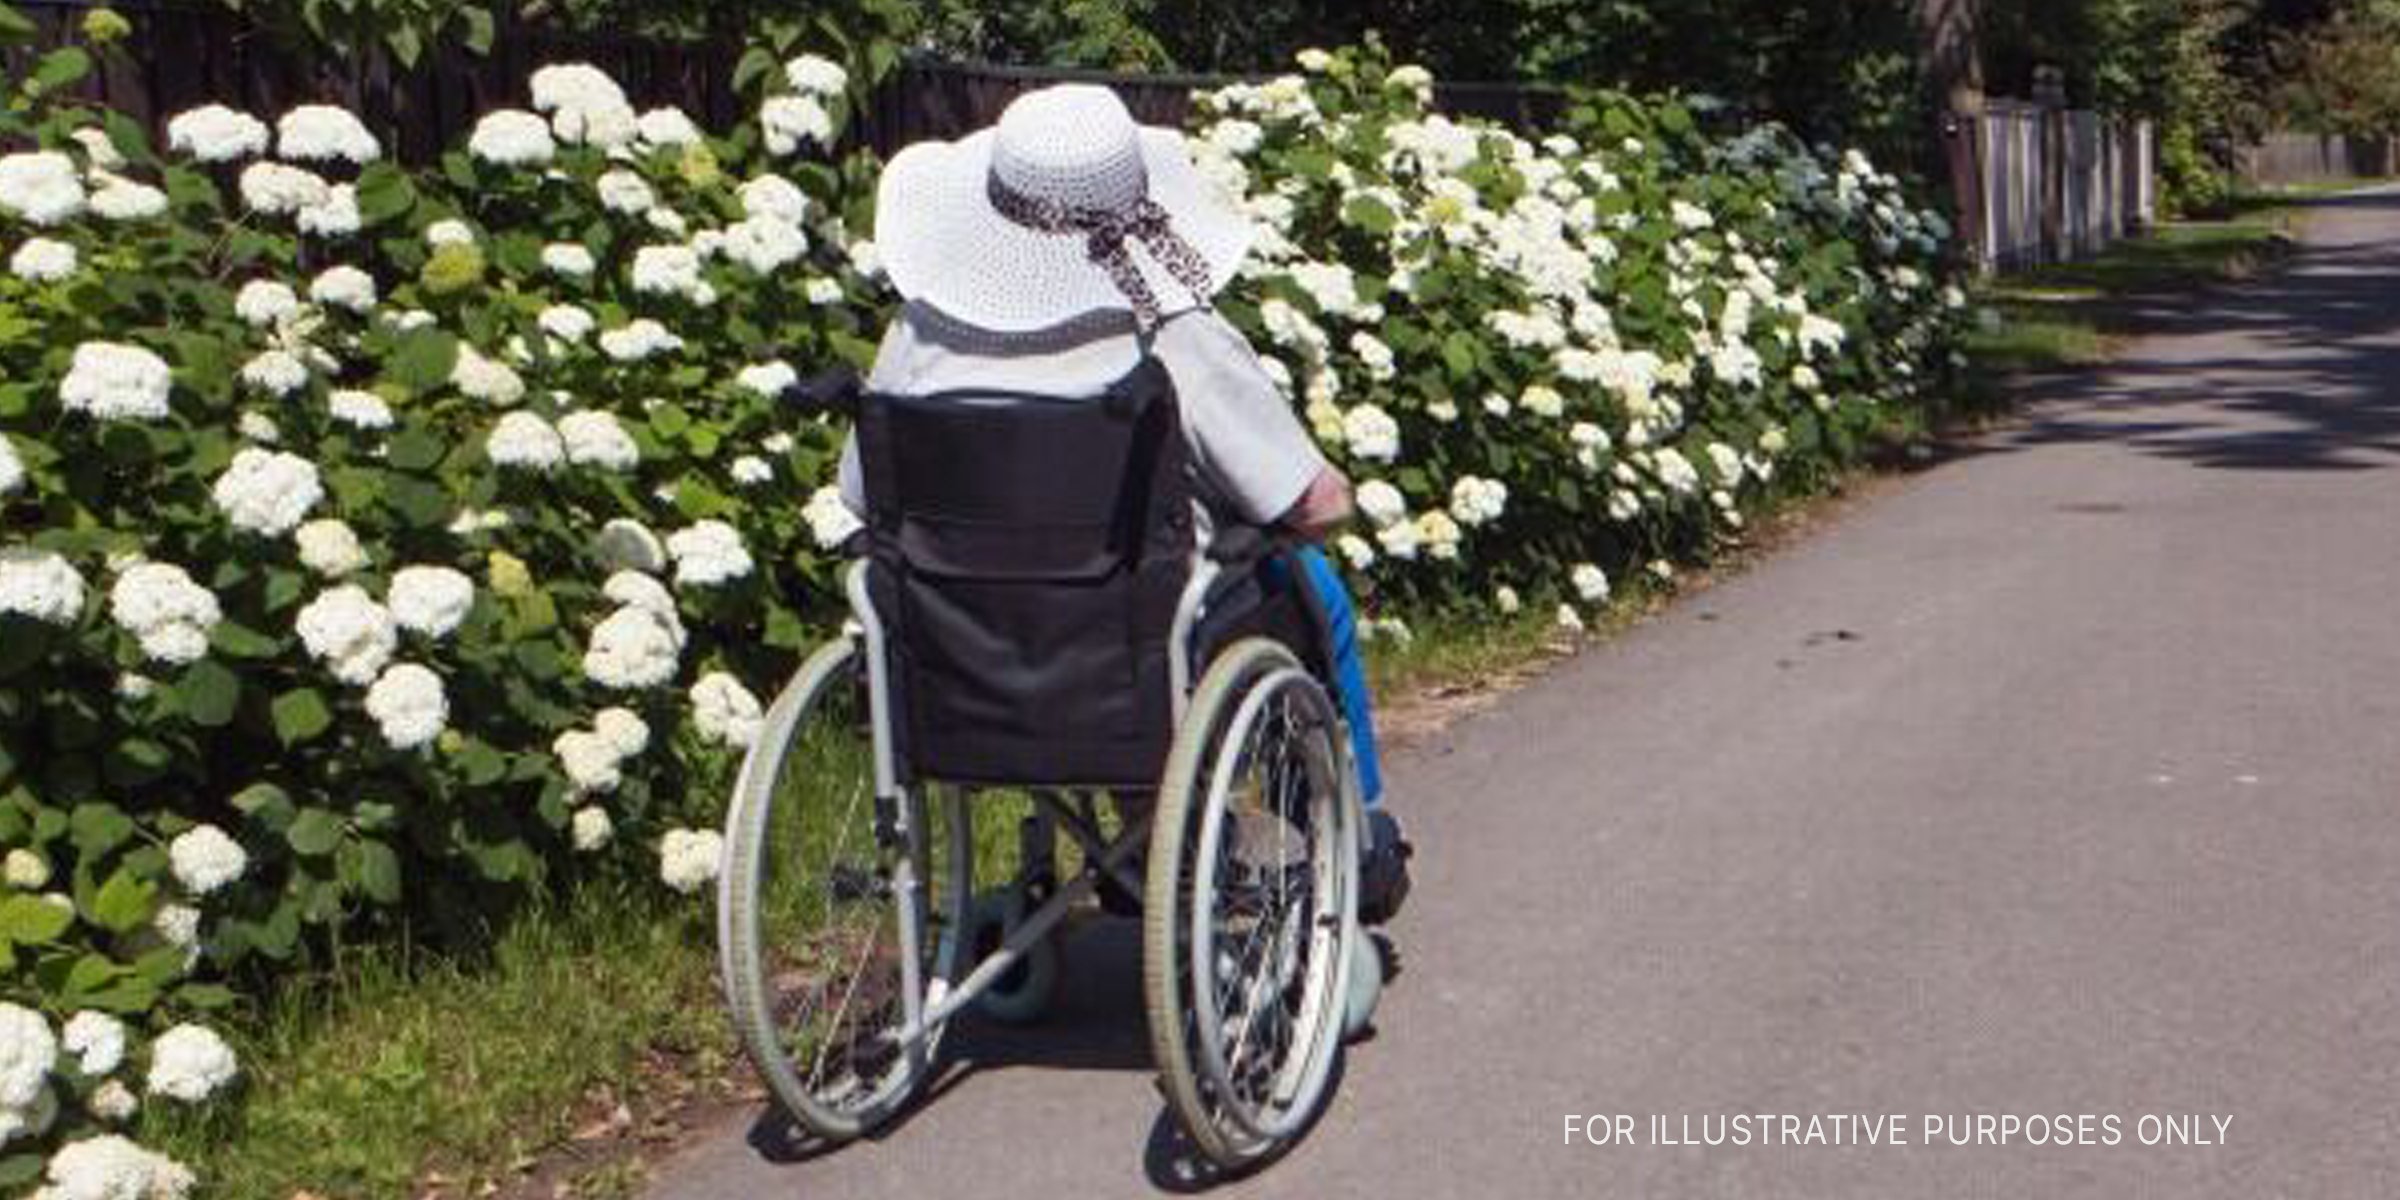 Woman in wheelchair in front of flowers. | Source: Shutterstock